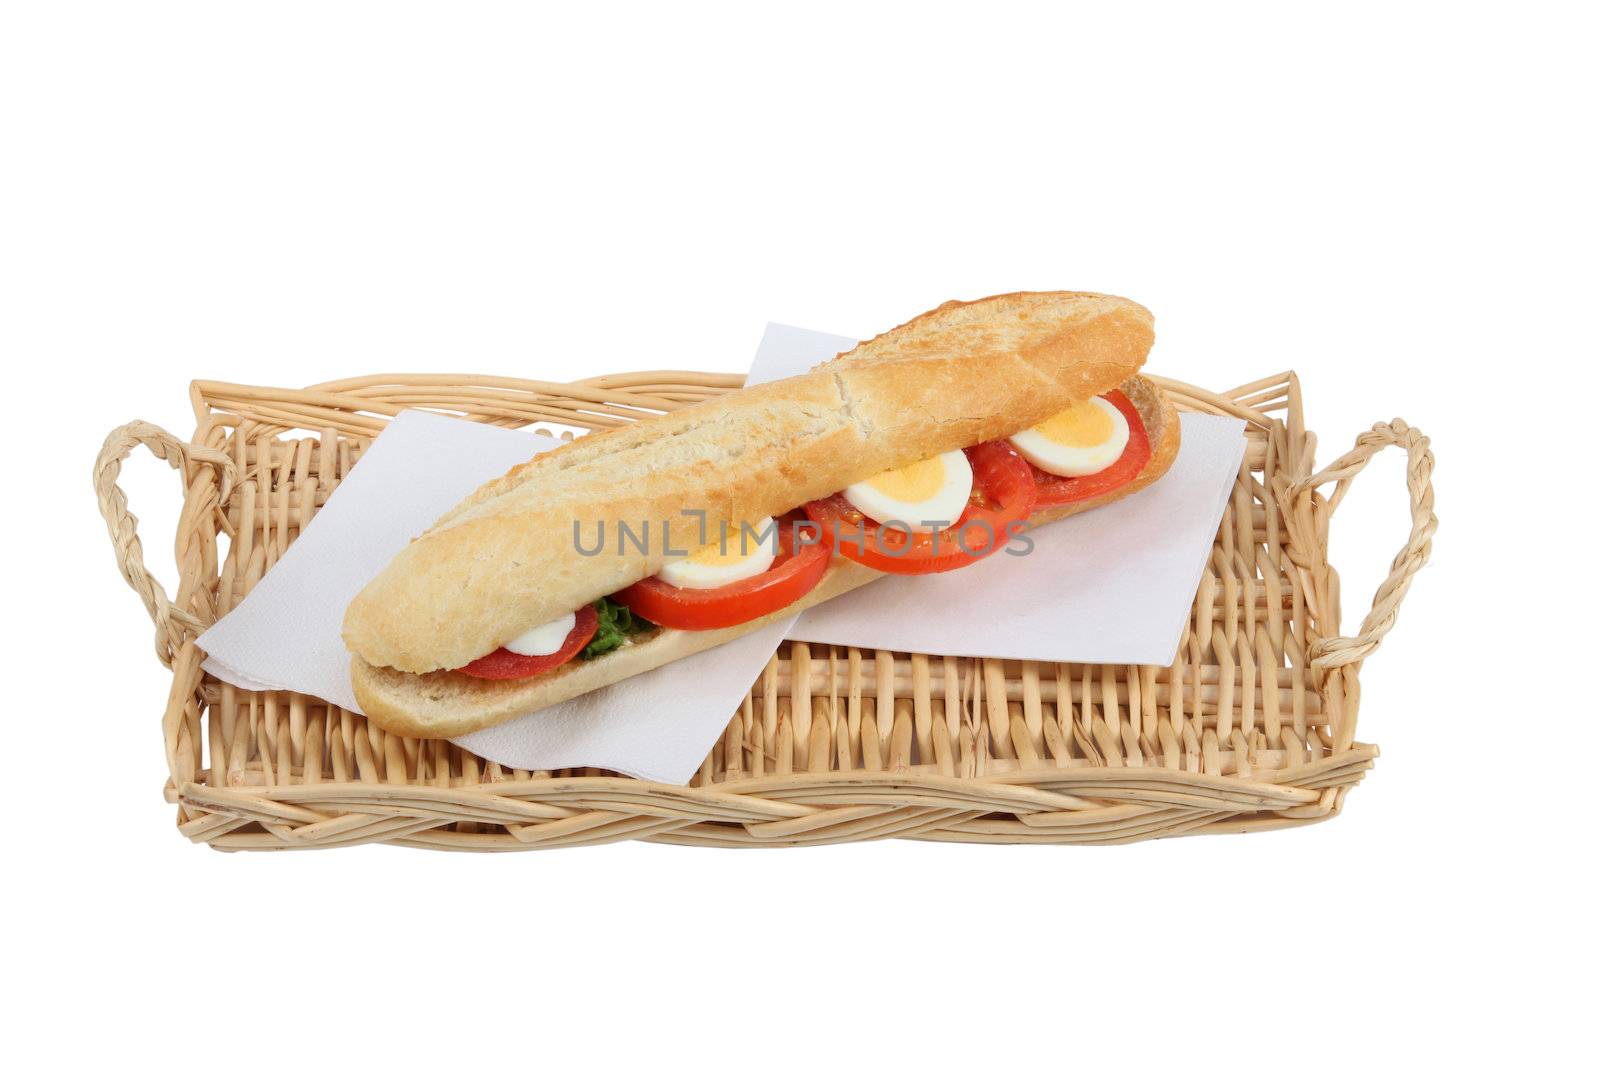 Egg and tomato baguette by phovoir